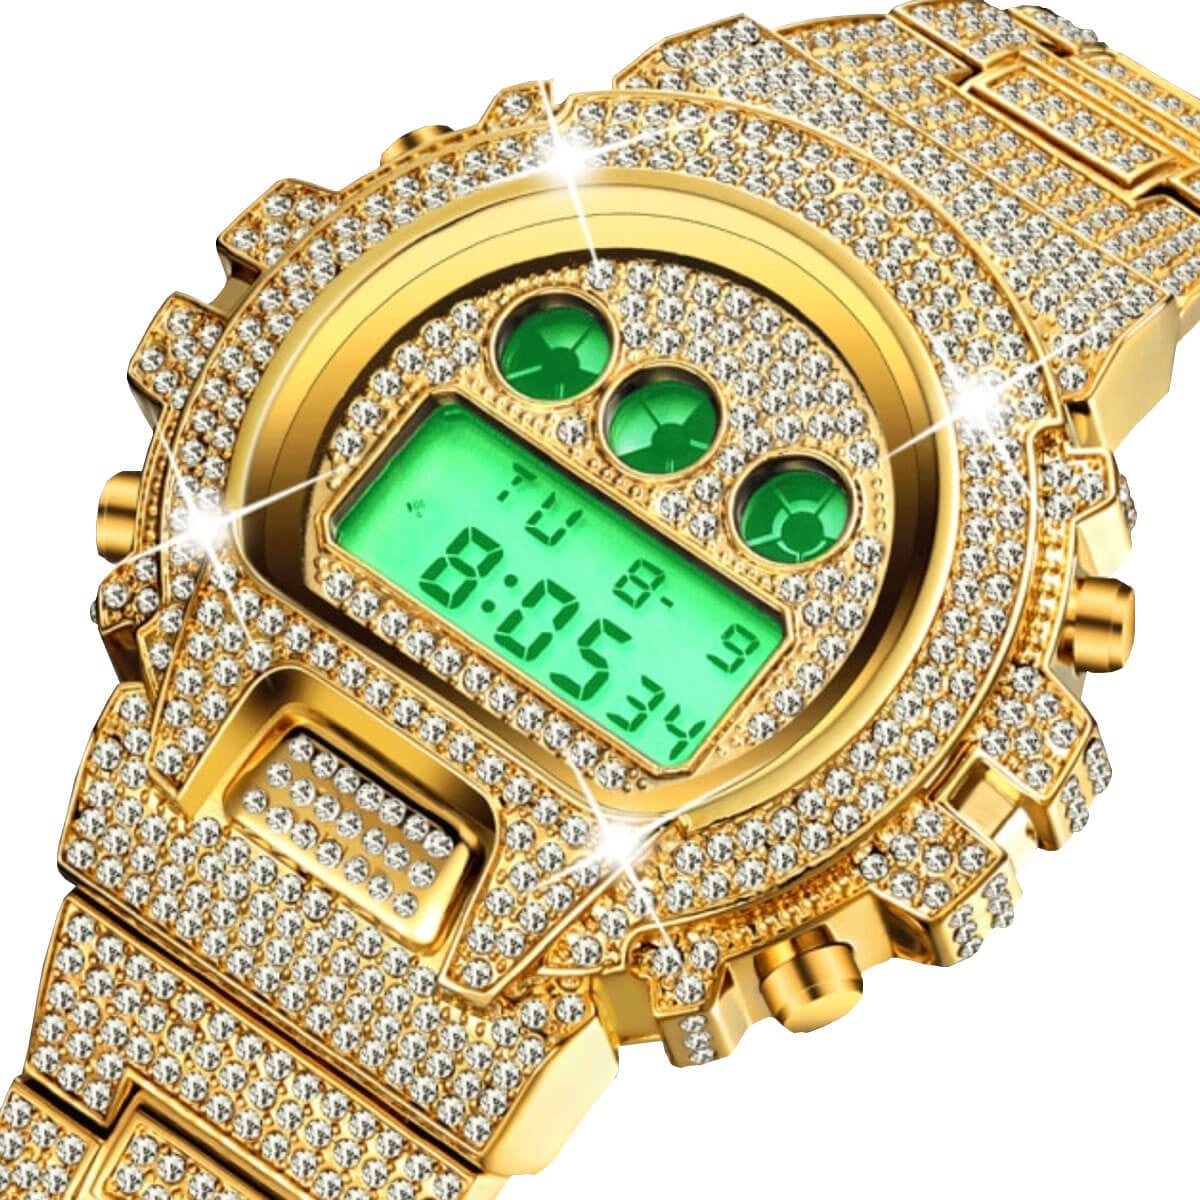 Hip Hop Fully Iced Out Digital Stainless Steel Watch